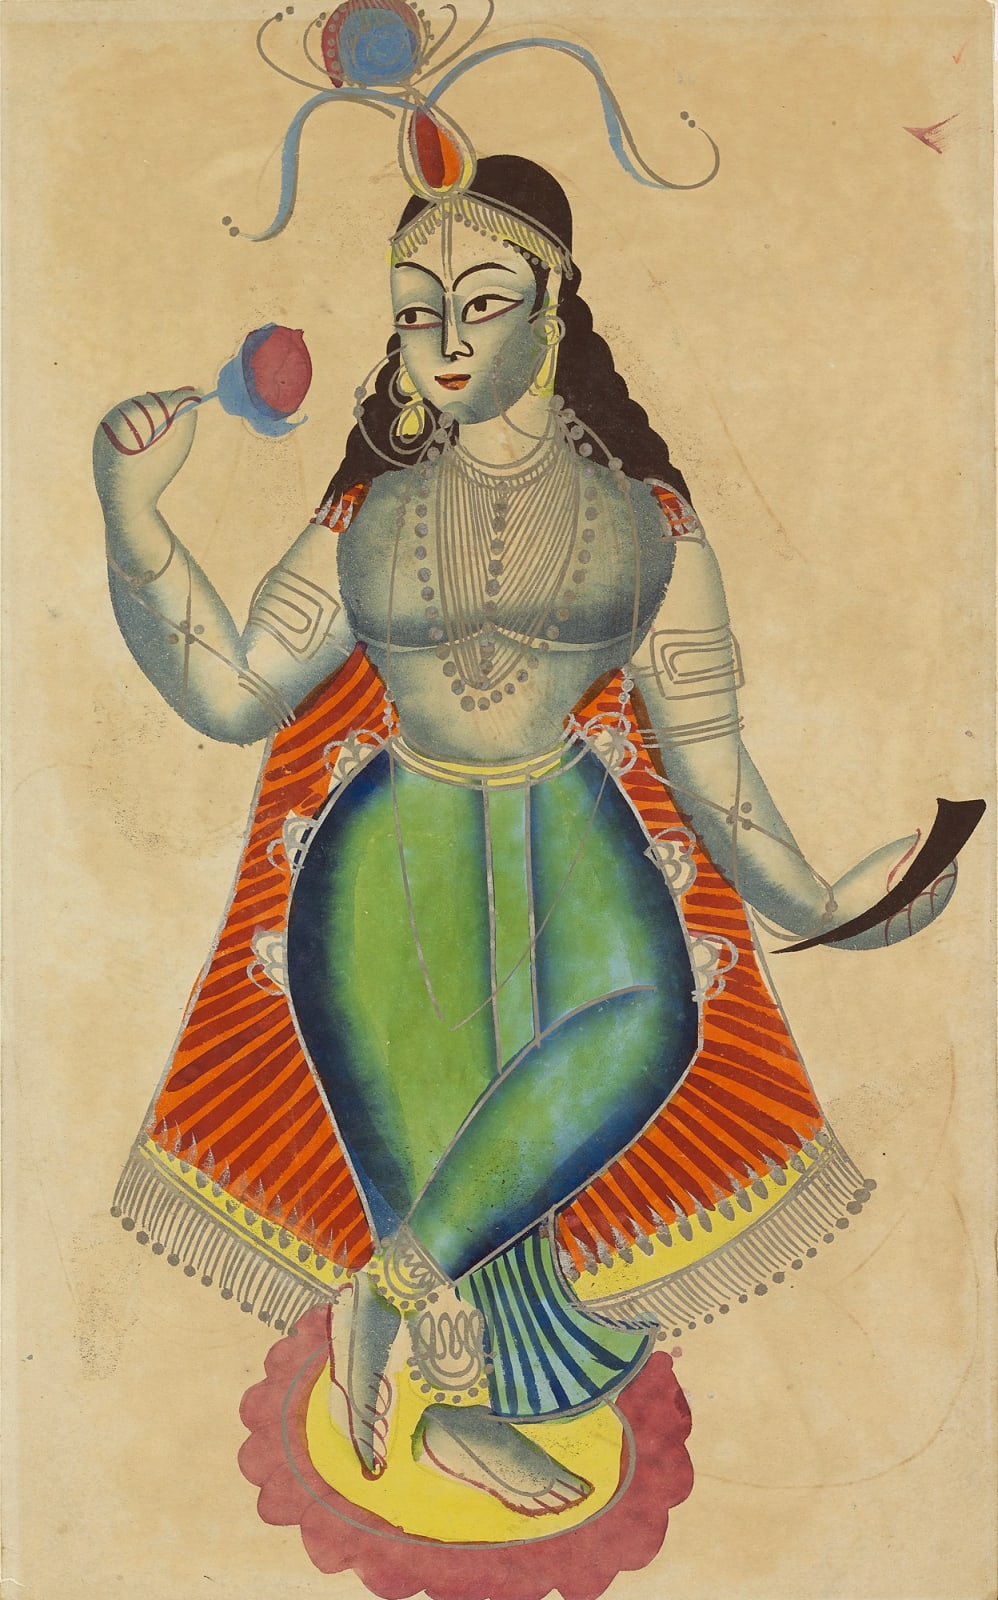 Folio with Depictions of Krishna on the Recto and a Courtesan on the Verso, Kalighat, Calcutta, c. 1870